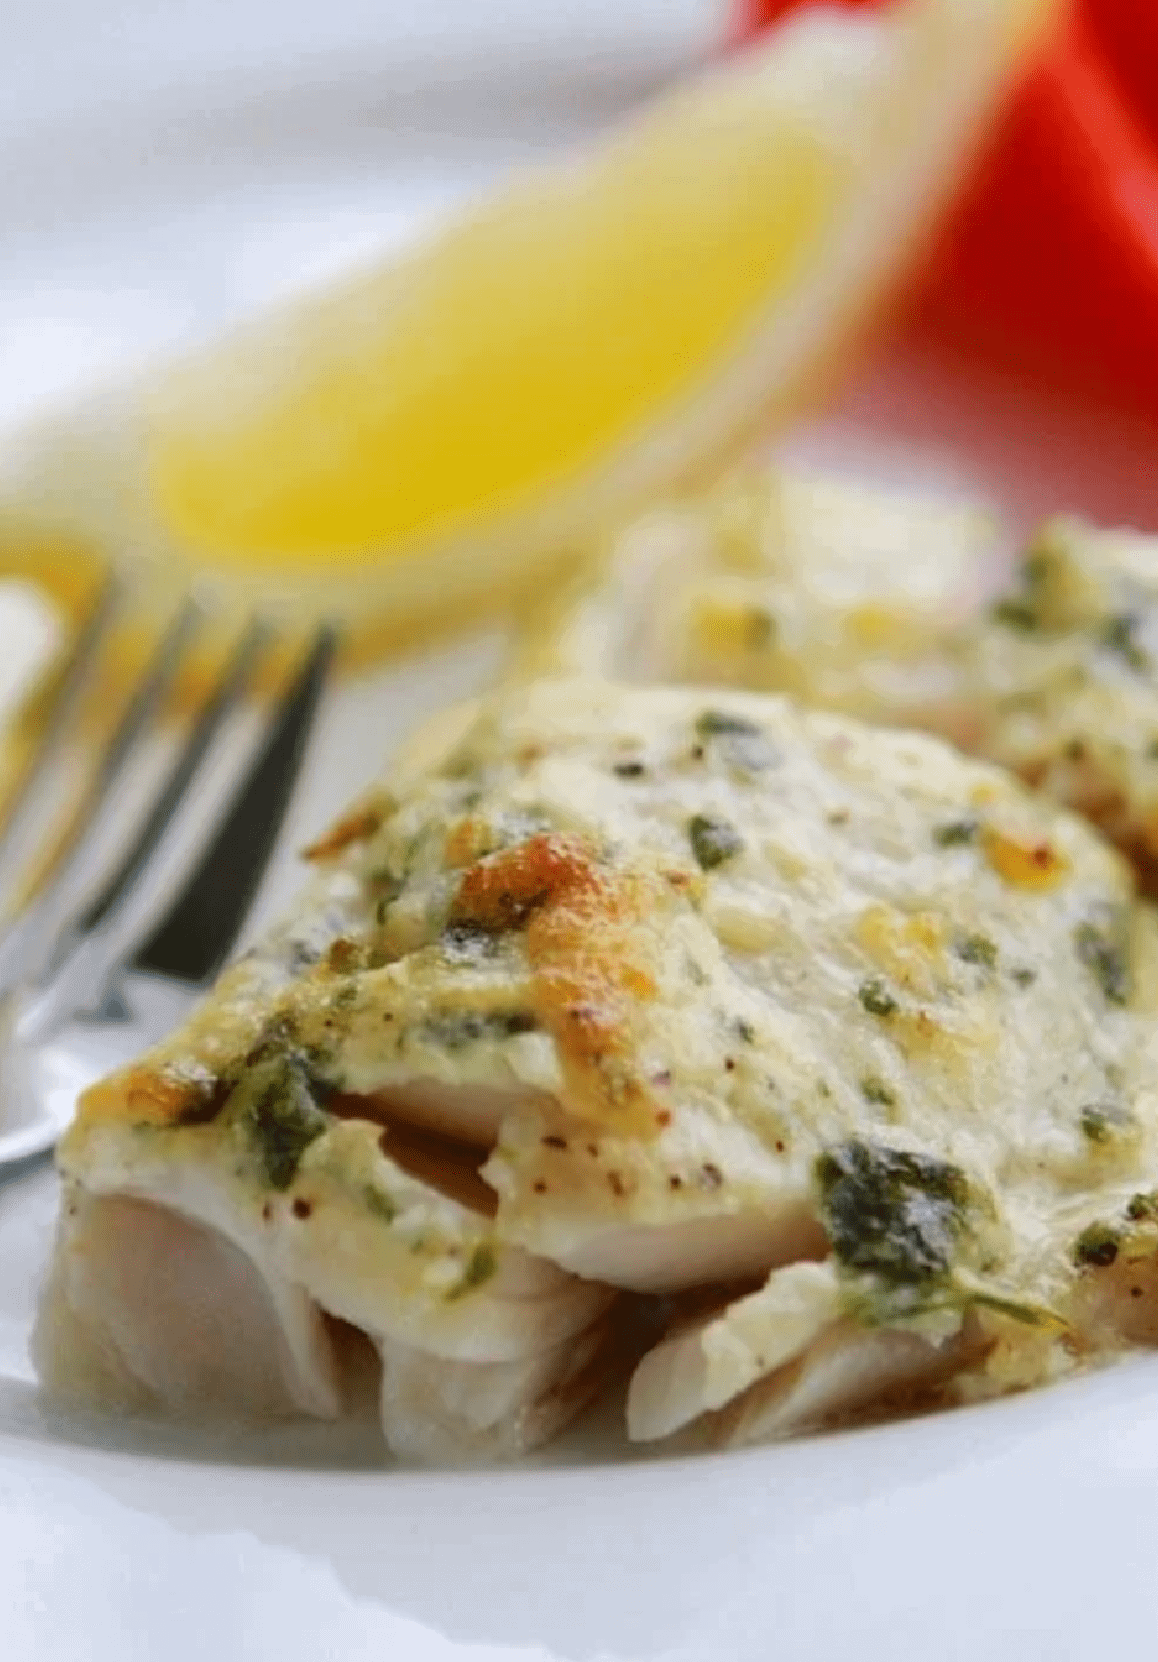 Baked Cod on plate with lemon and fork